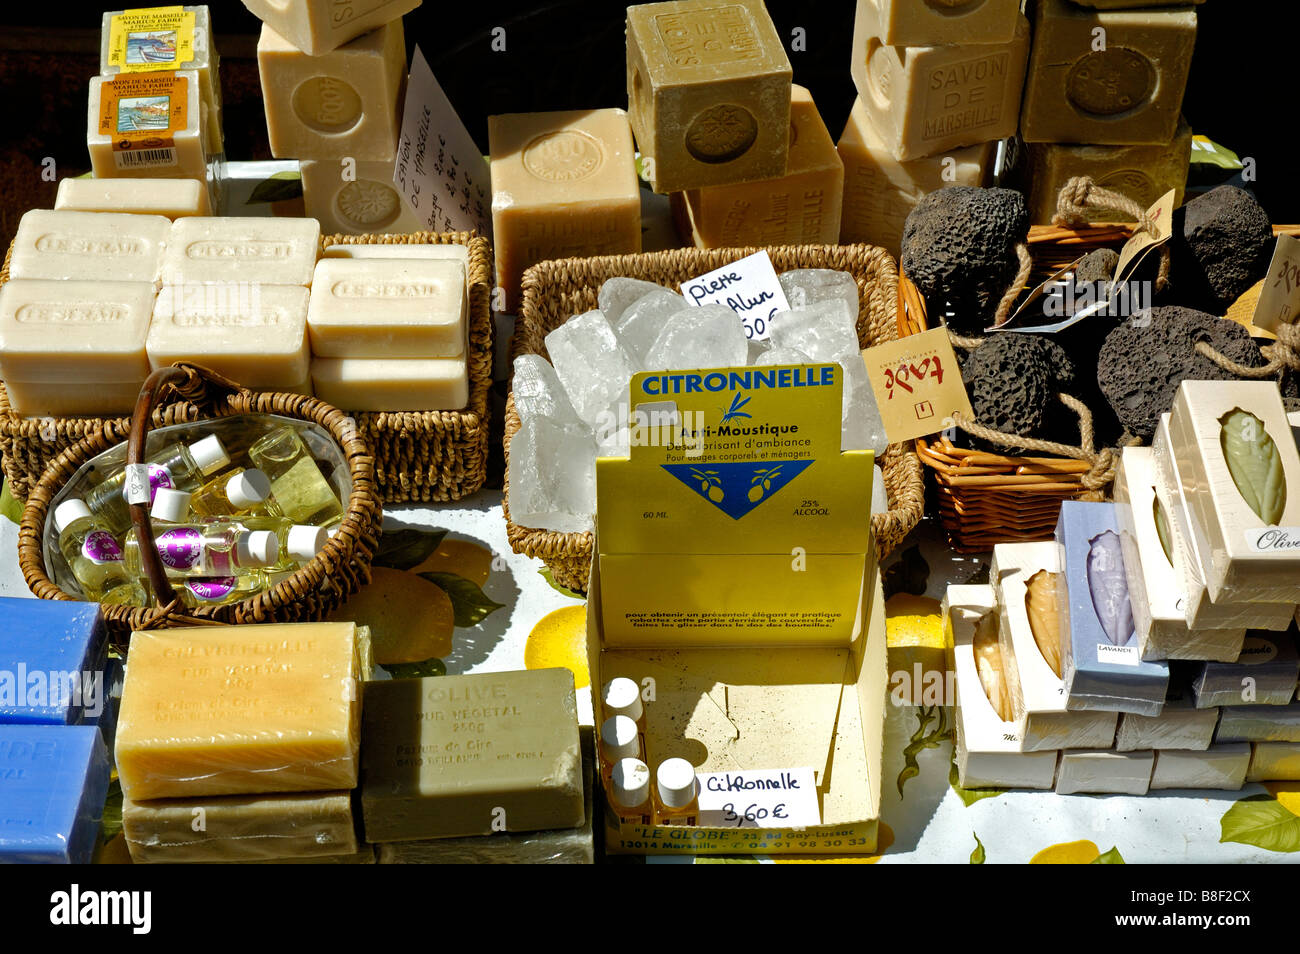 Soap and toiletries for sale, Orange, Provence, France. Stock Photo